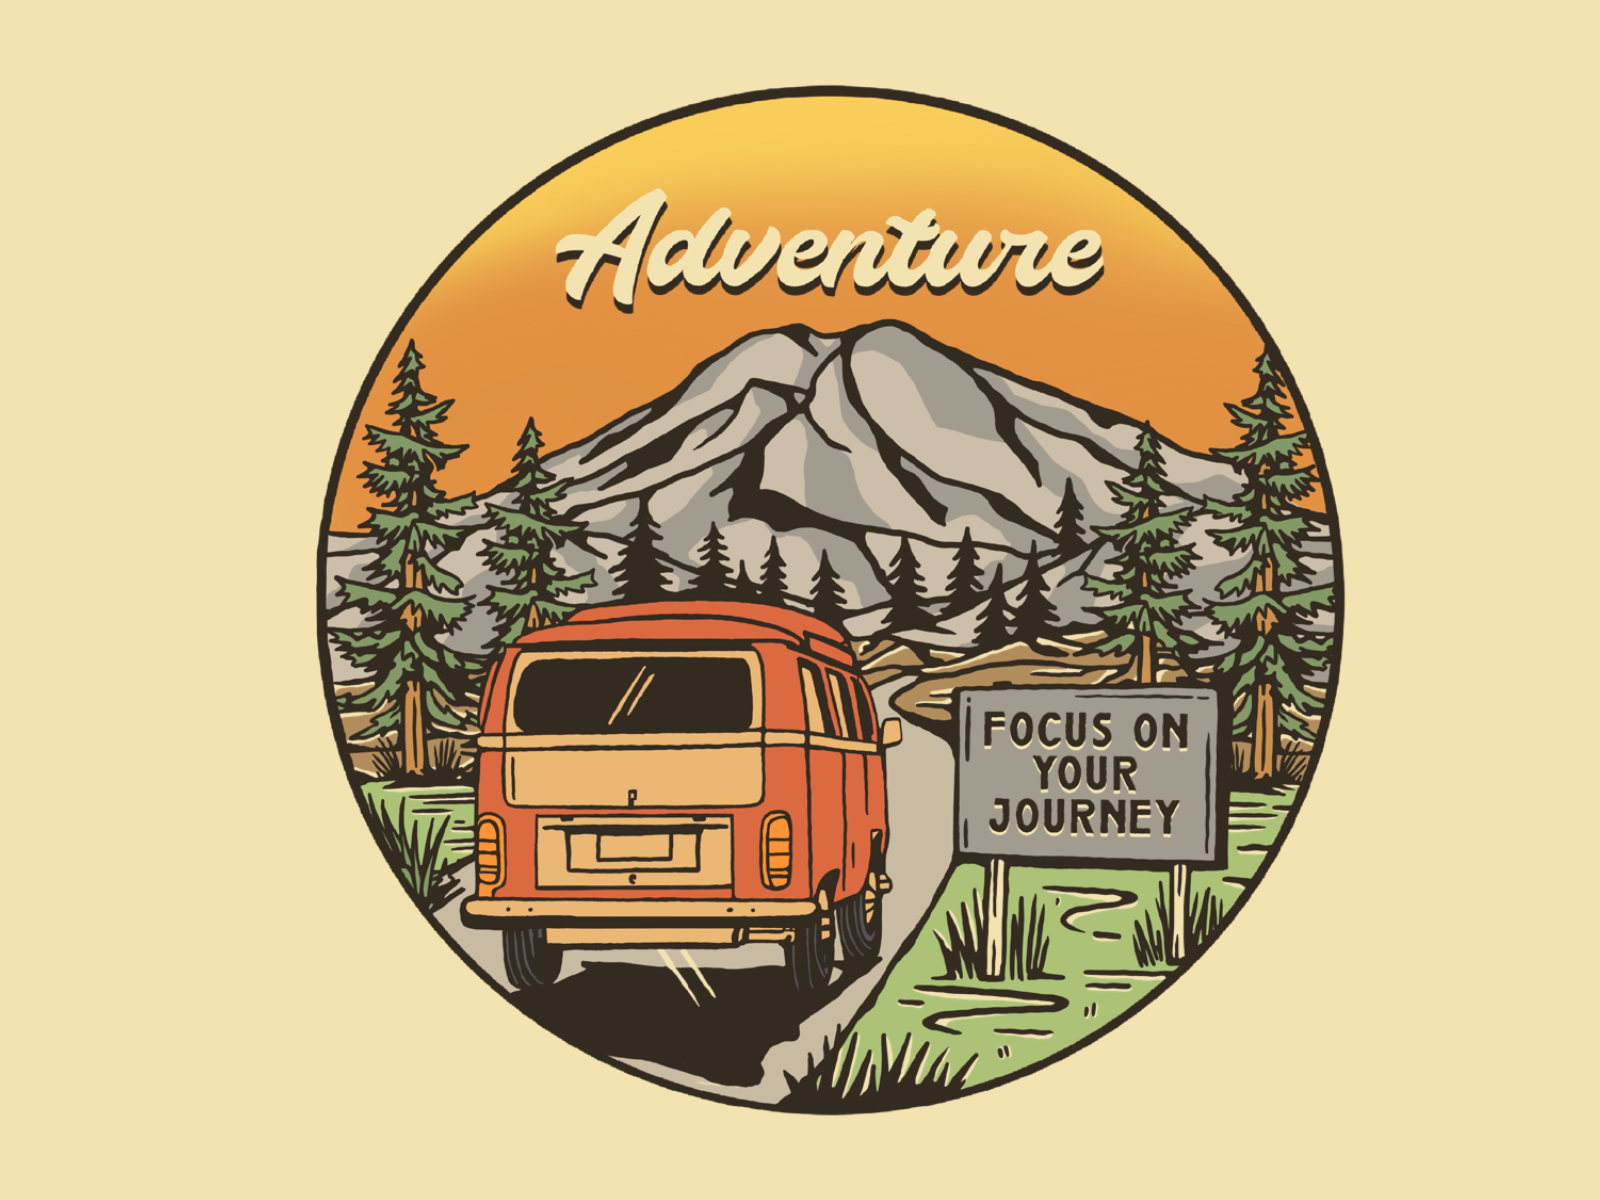 Focus On Your Journey by DONFIX on Dribbble